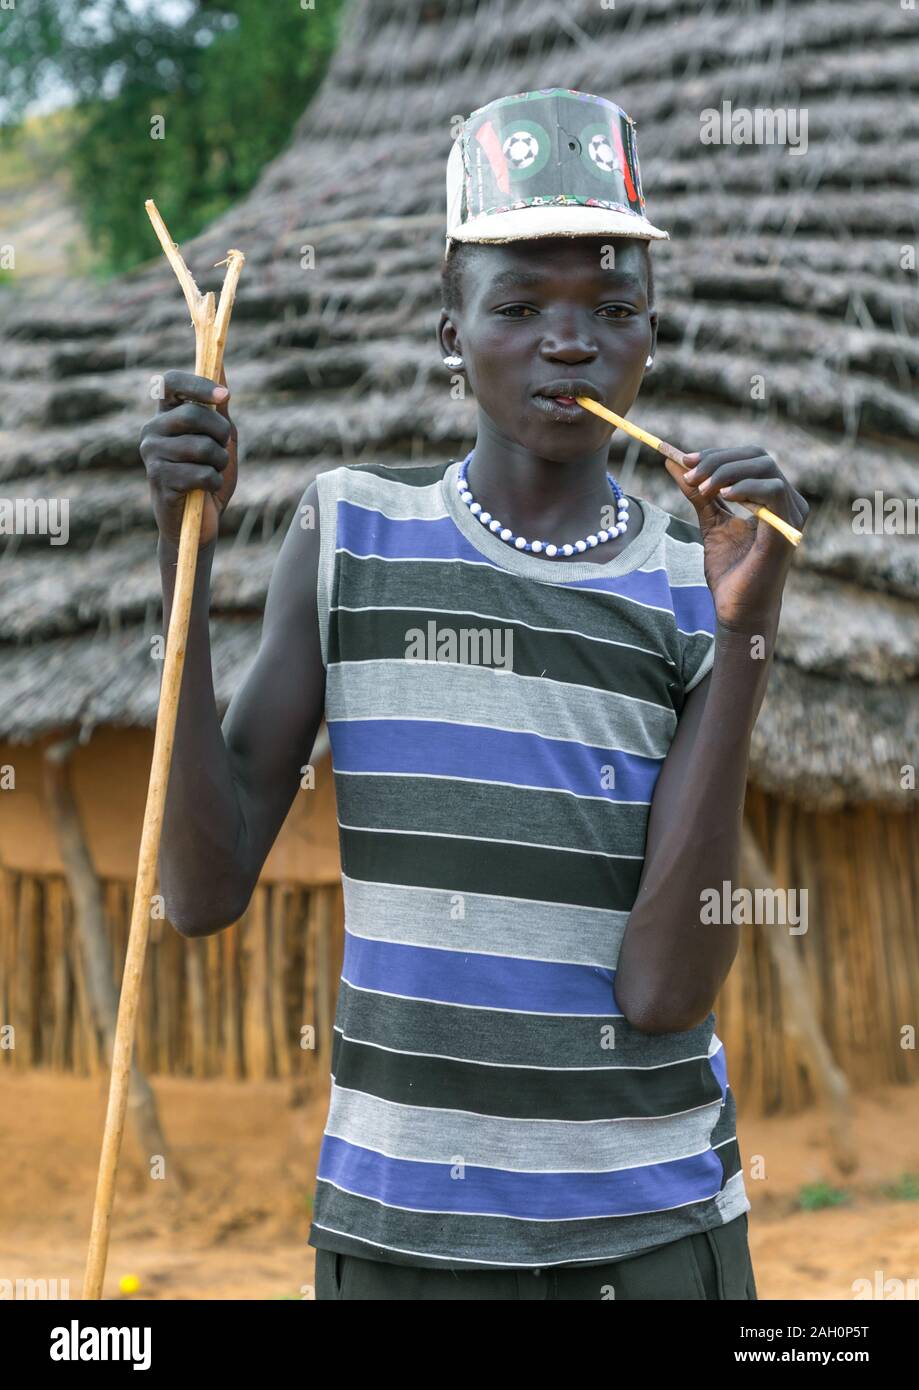 Larim tribe boy with a fashionnable look using a wooden toothbrush, Boya Mountains, Imatong, South Sudan Stock Photo